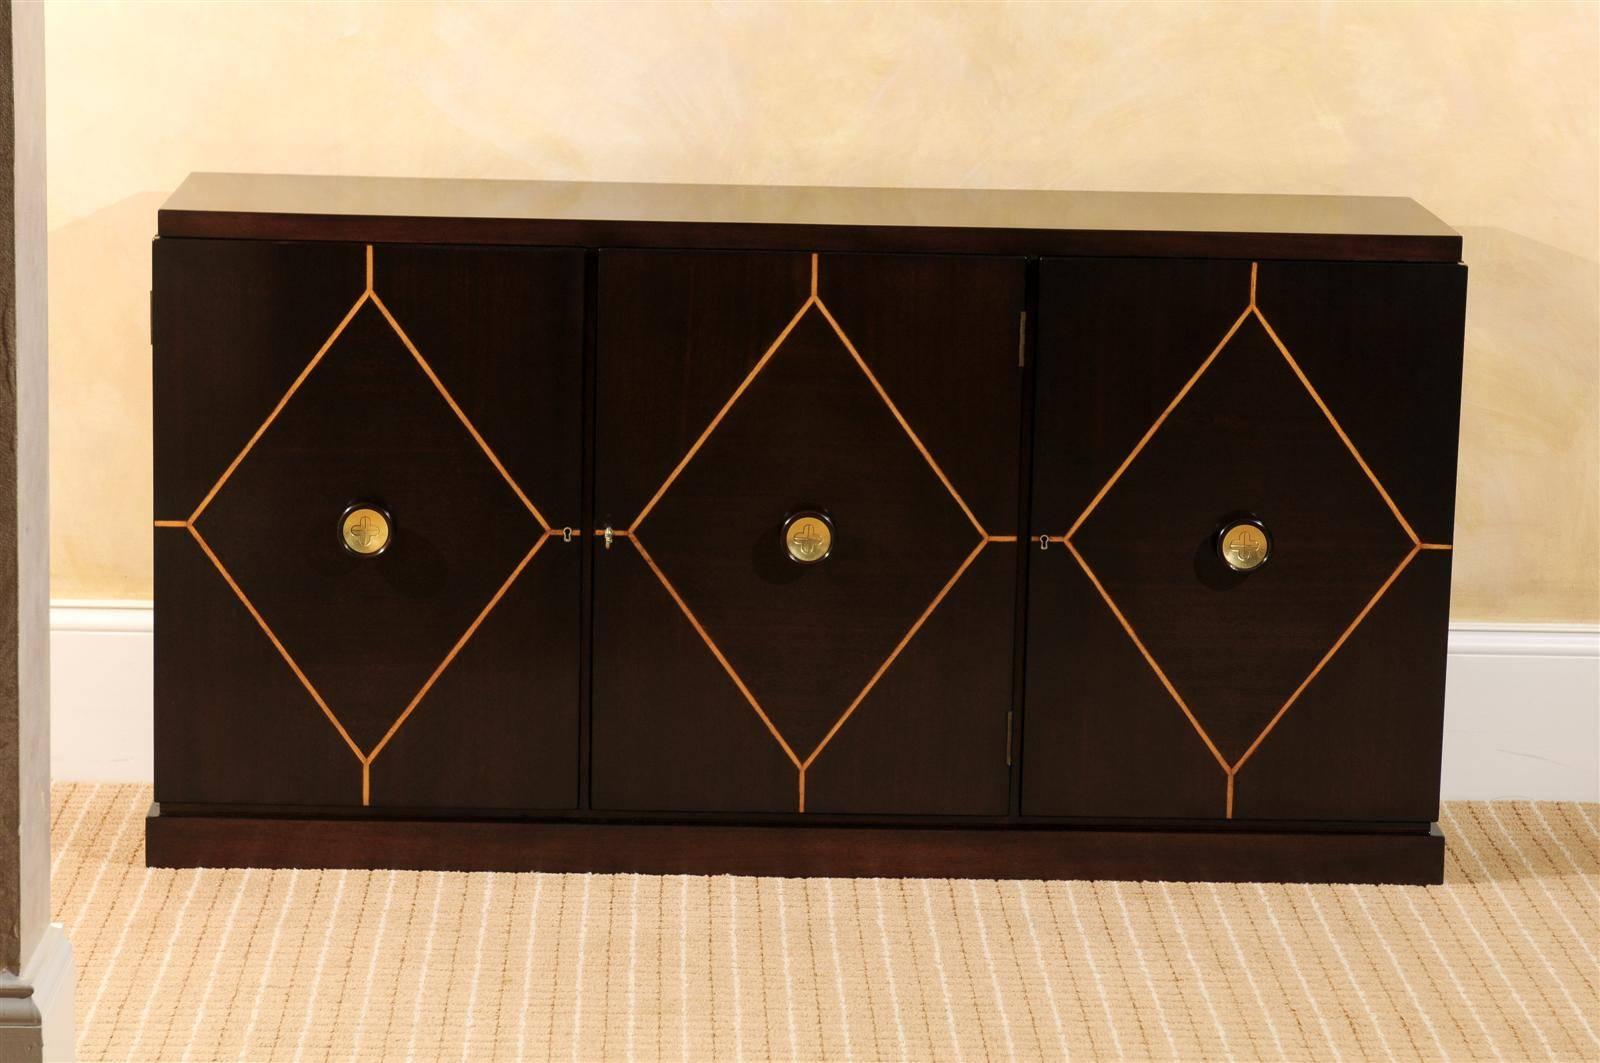 An exceptional cabinet or buffet by Tommi Parzinger for Charak Modern, circa 1950. Expertly crafted Mahogany case construction. The three doors are accented with a diamond pattern inlay in maple and mahogany/brass knobs. Configured with a center